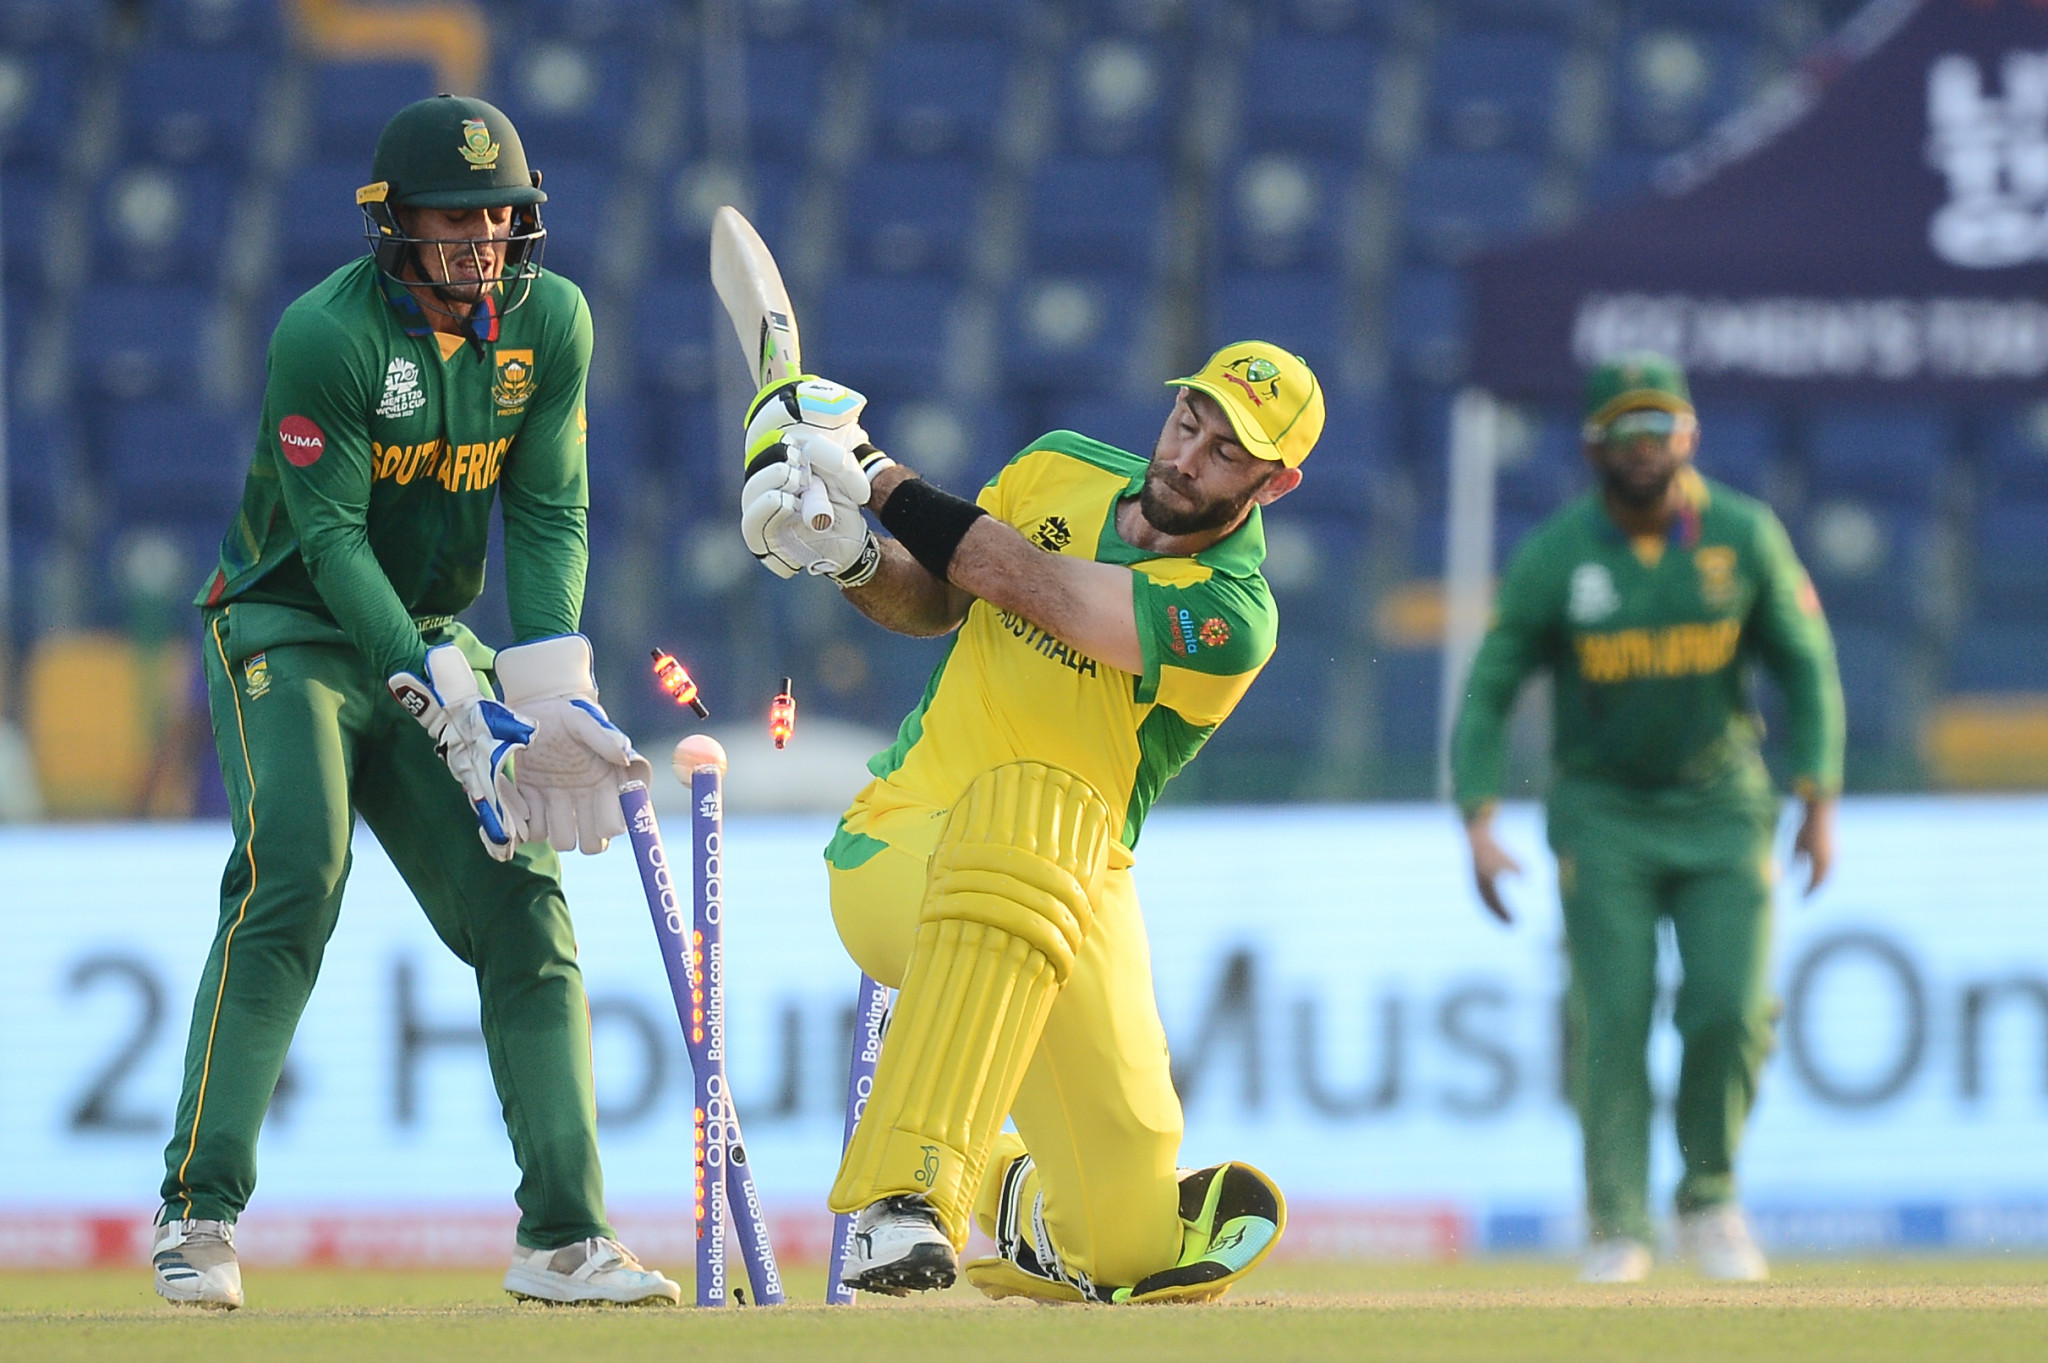 Australia beat South Africa by five wickets with two balls to spare as Group One of the Men's T20 World Cup Super12 stage got underway ©Getty Images 